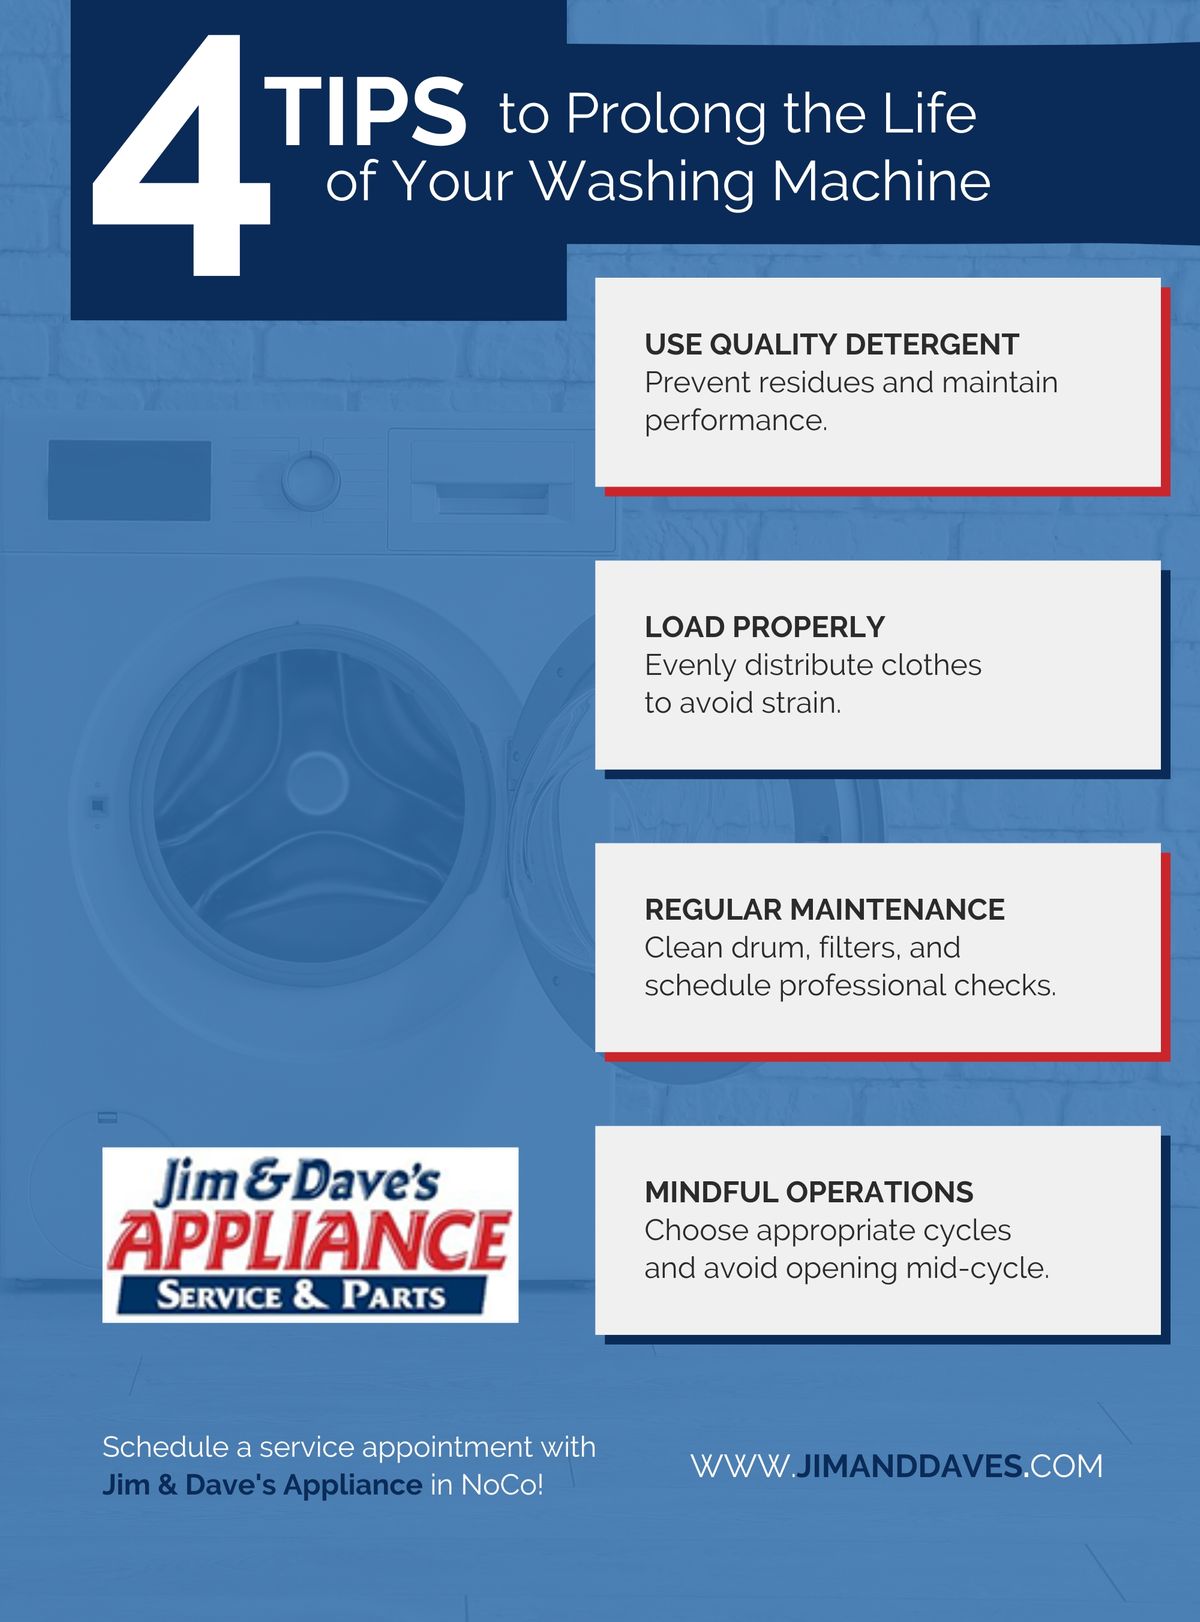 M26506 - Information Design - Infographic - 4 Tips to Prolong the Life of Your Washing Machine.jpg